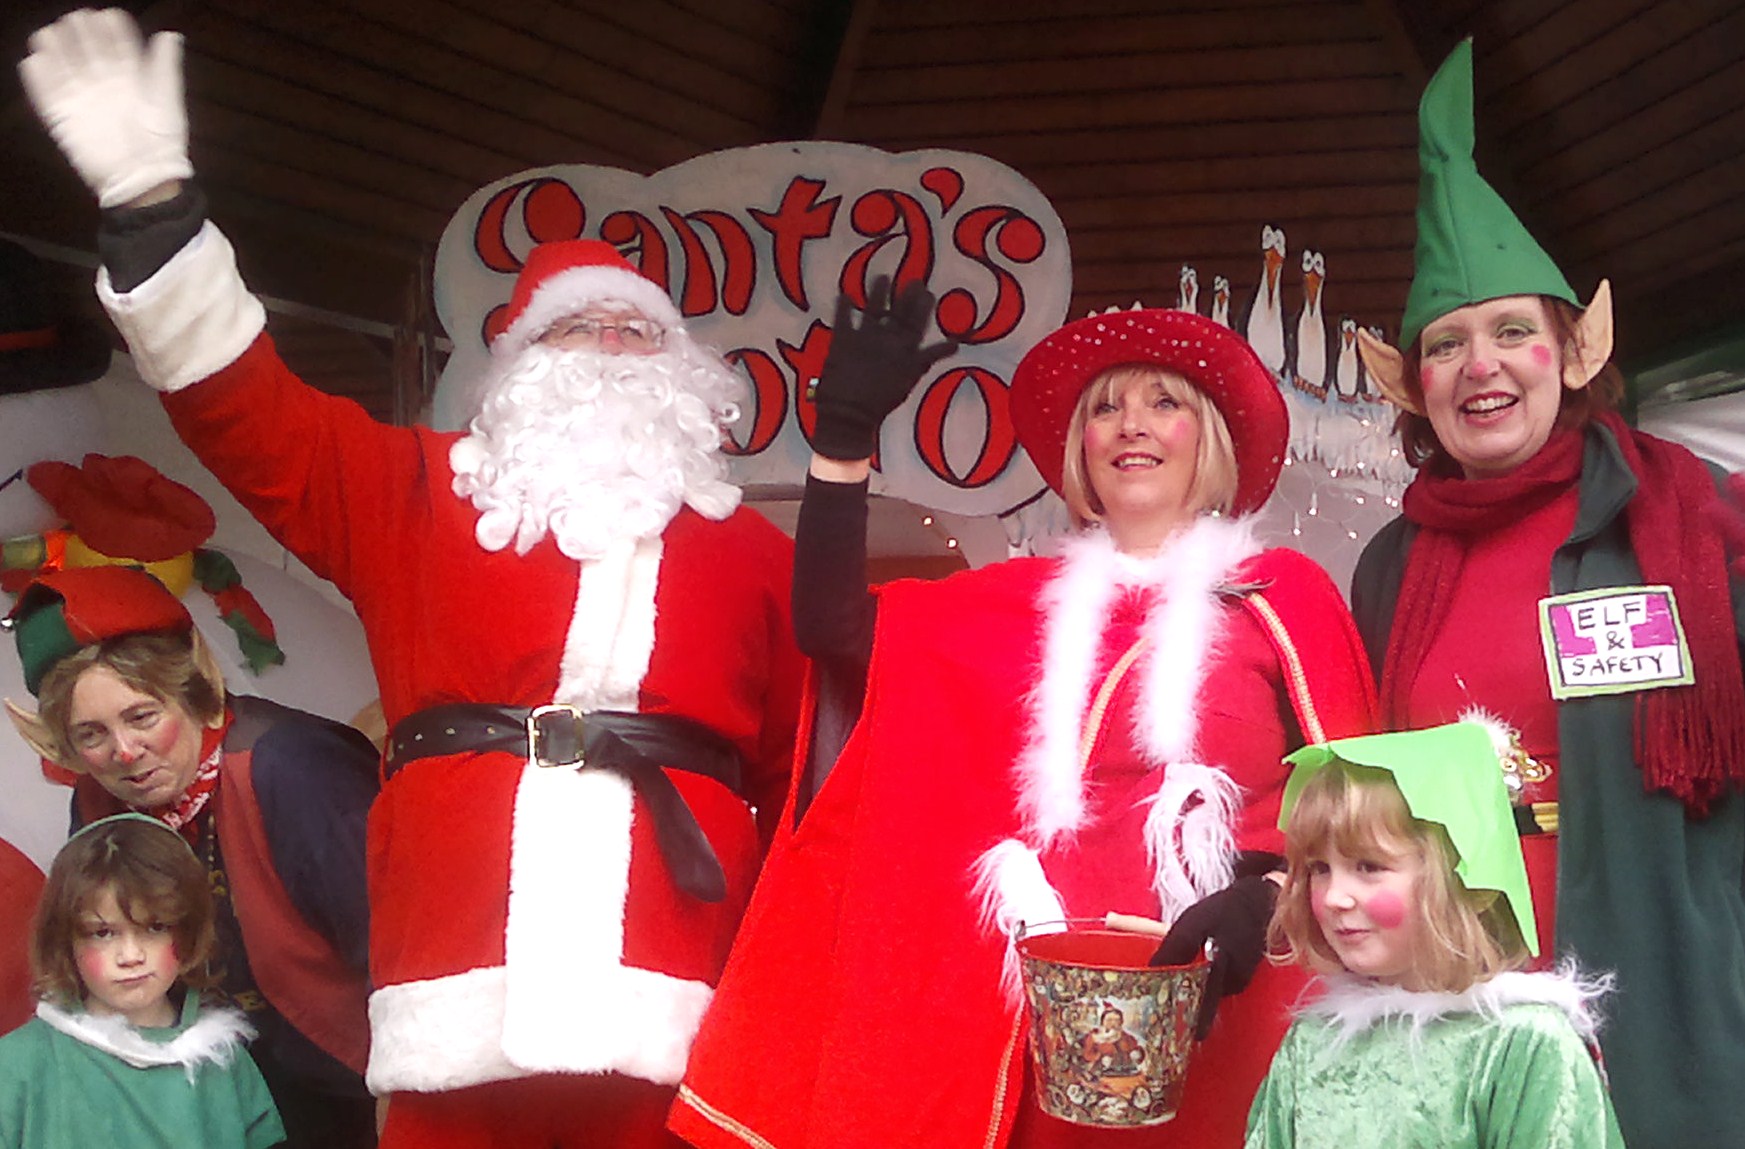 Christmas celebration in Woodley Town Centre